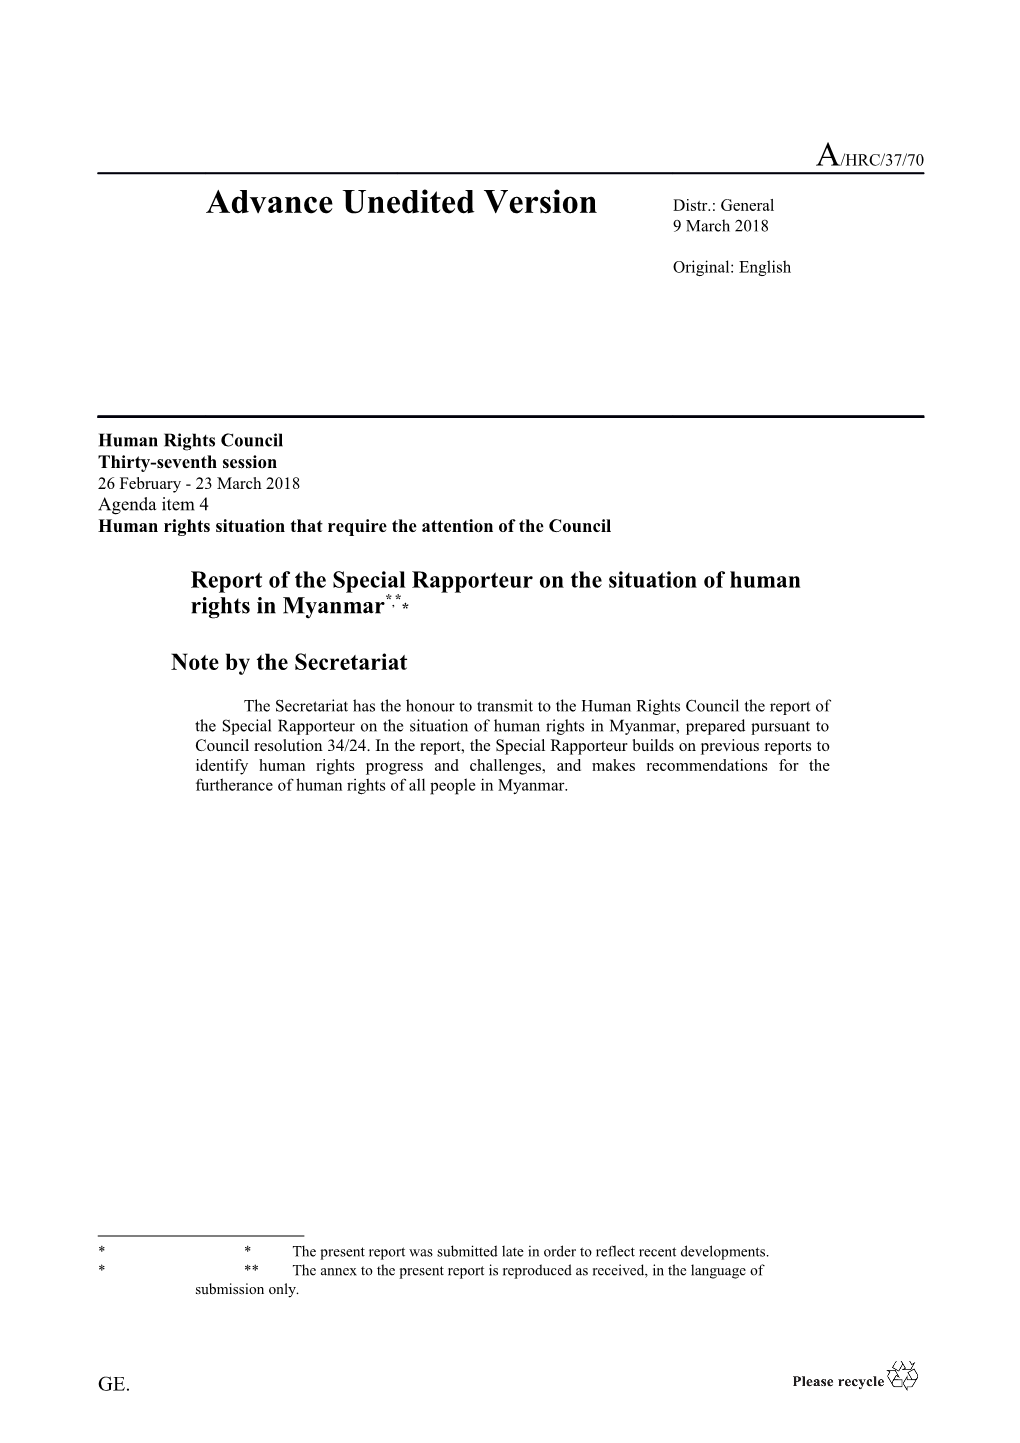 Report of the Special Rapporteur on the Situation of Human Rights in Myanmar in English